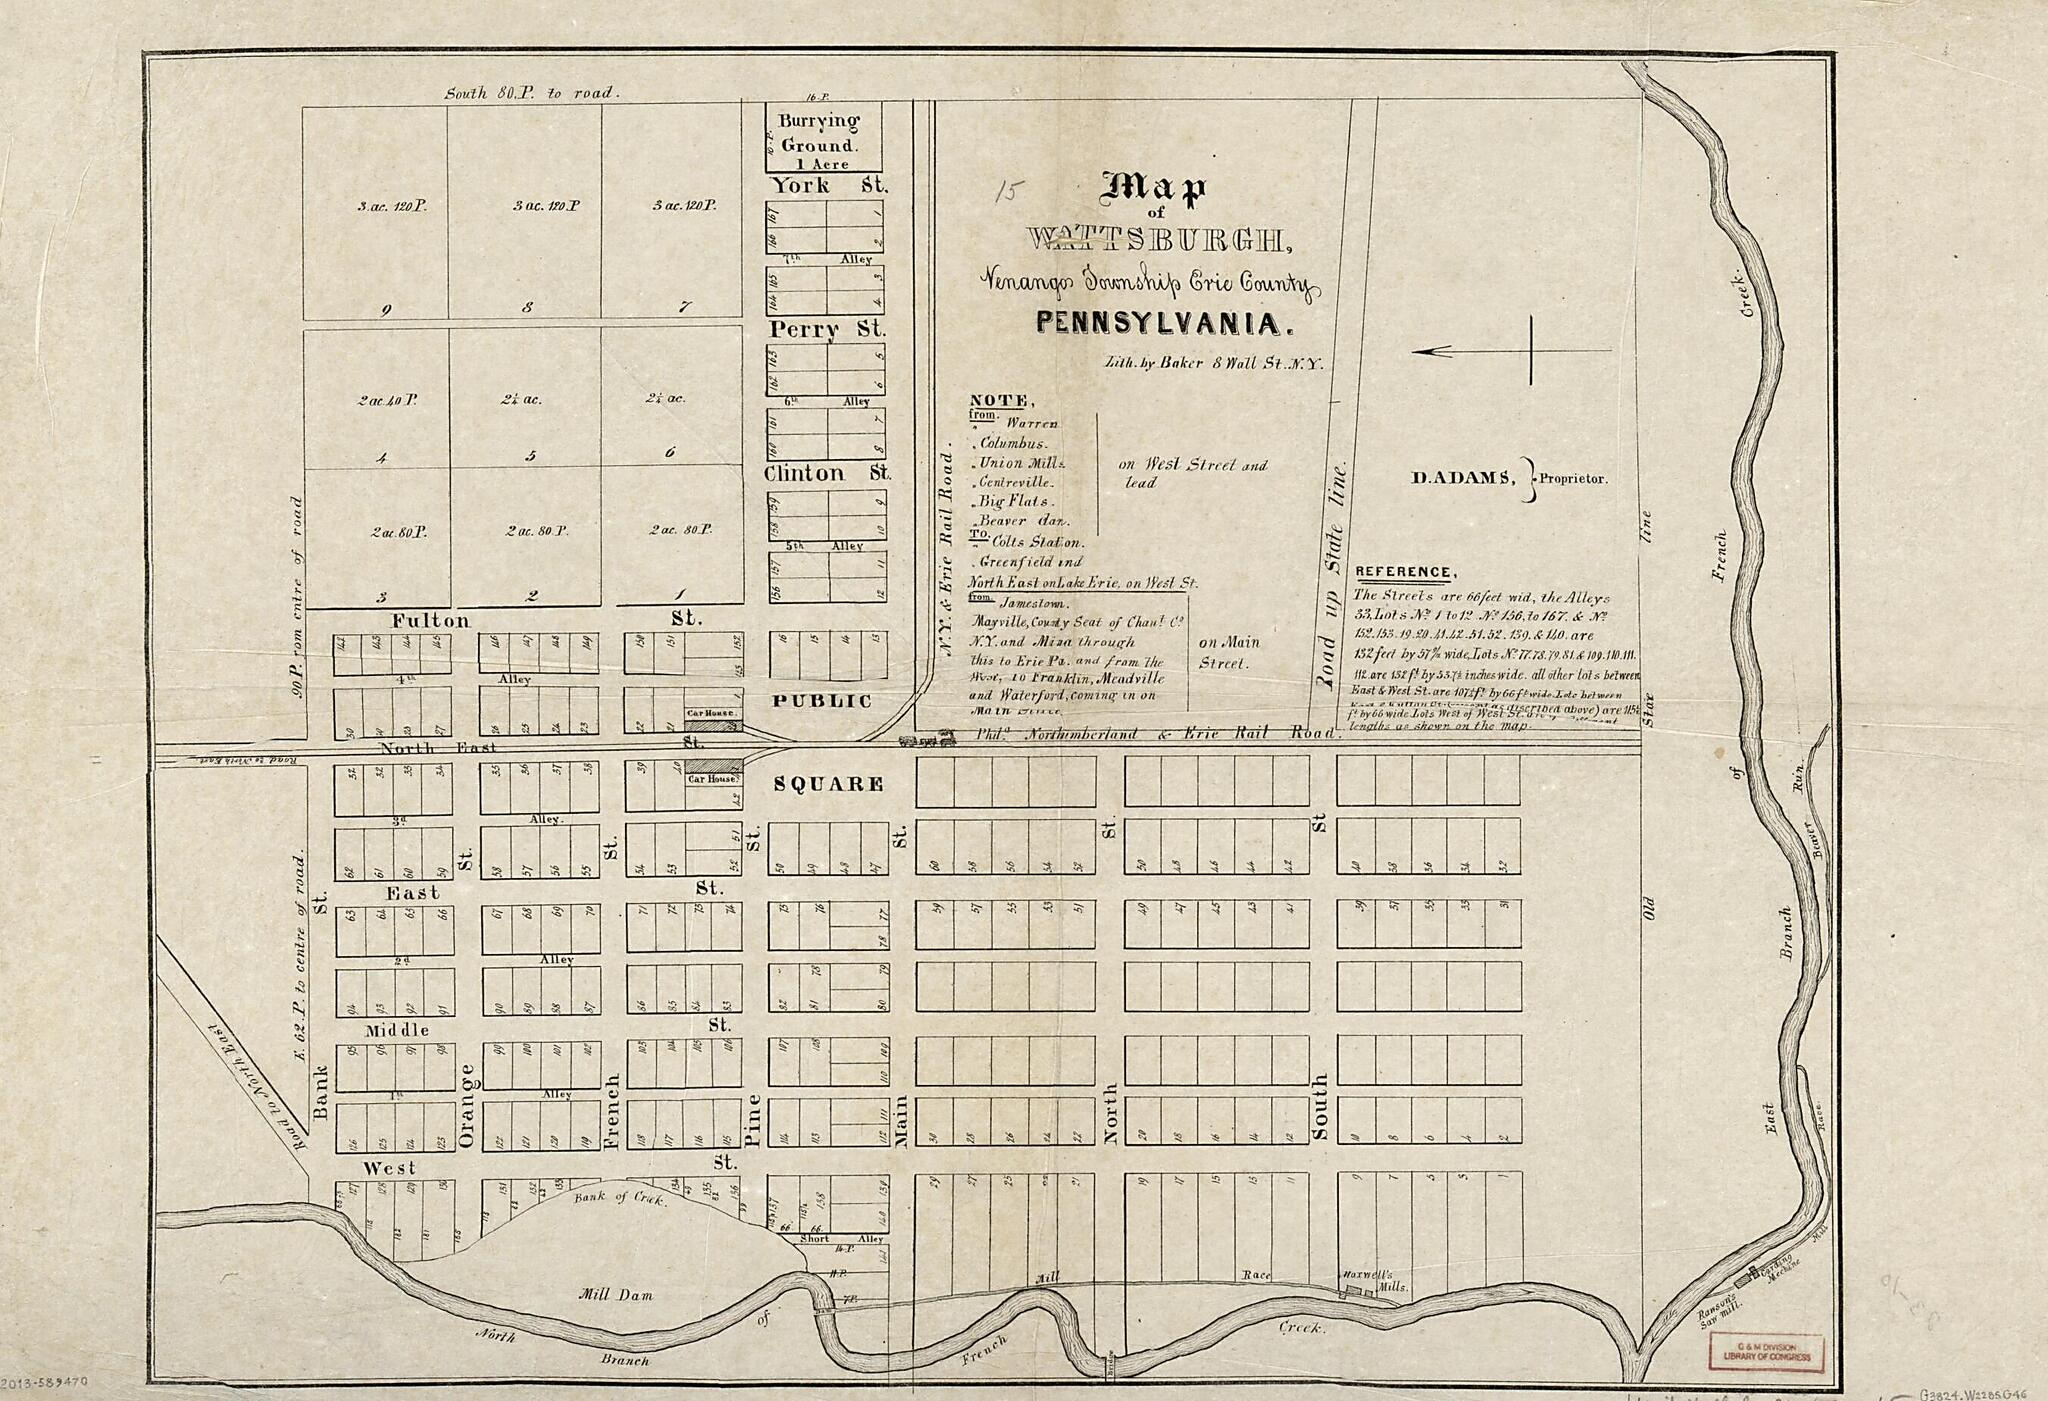 This old map of Map of Wattsburgh, Venango Township, Erie County, Pennsylvania from 1836 was created by D. Adams, Alfred E. Baker,  Philip Lee Phillips Society in 1836